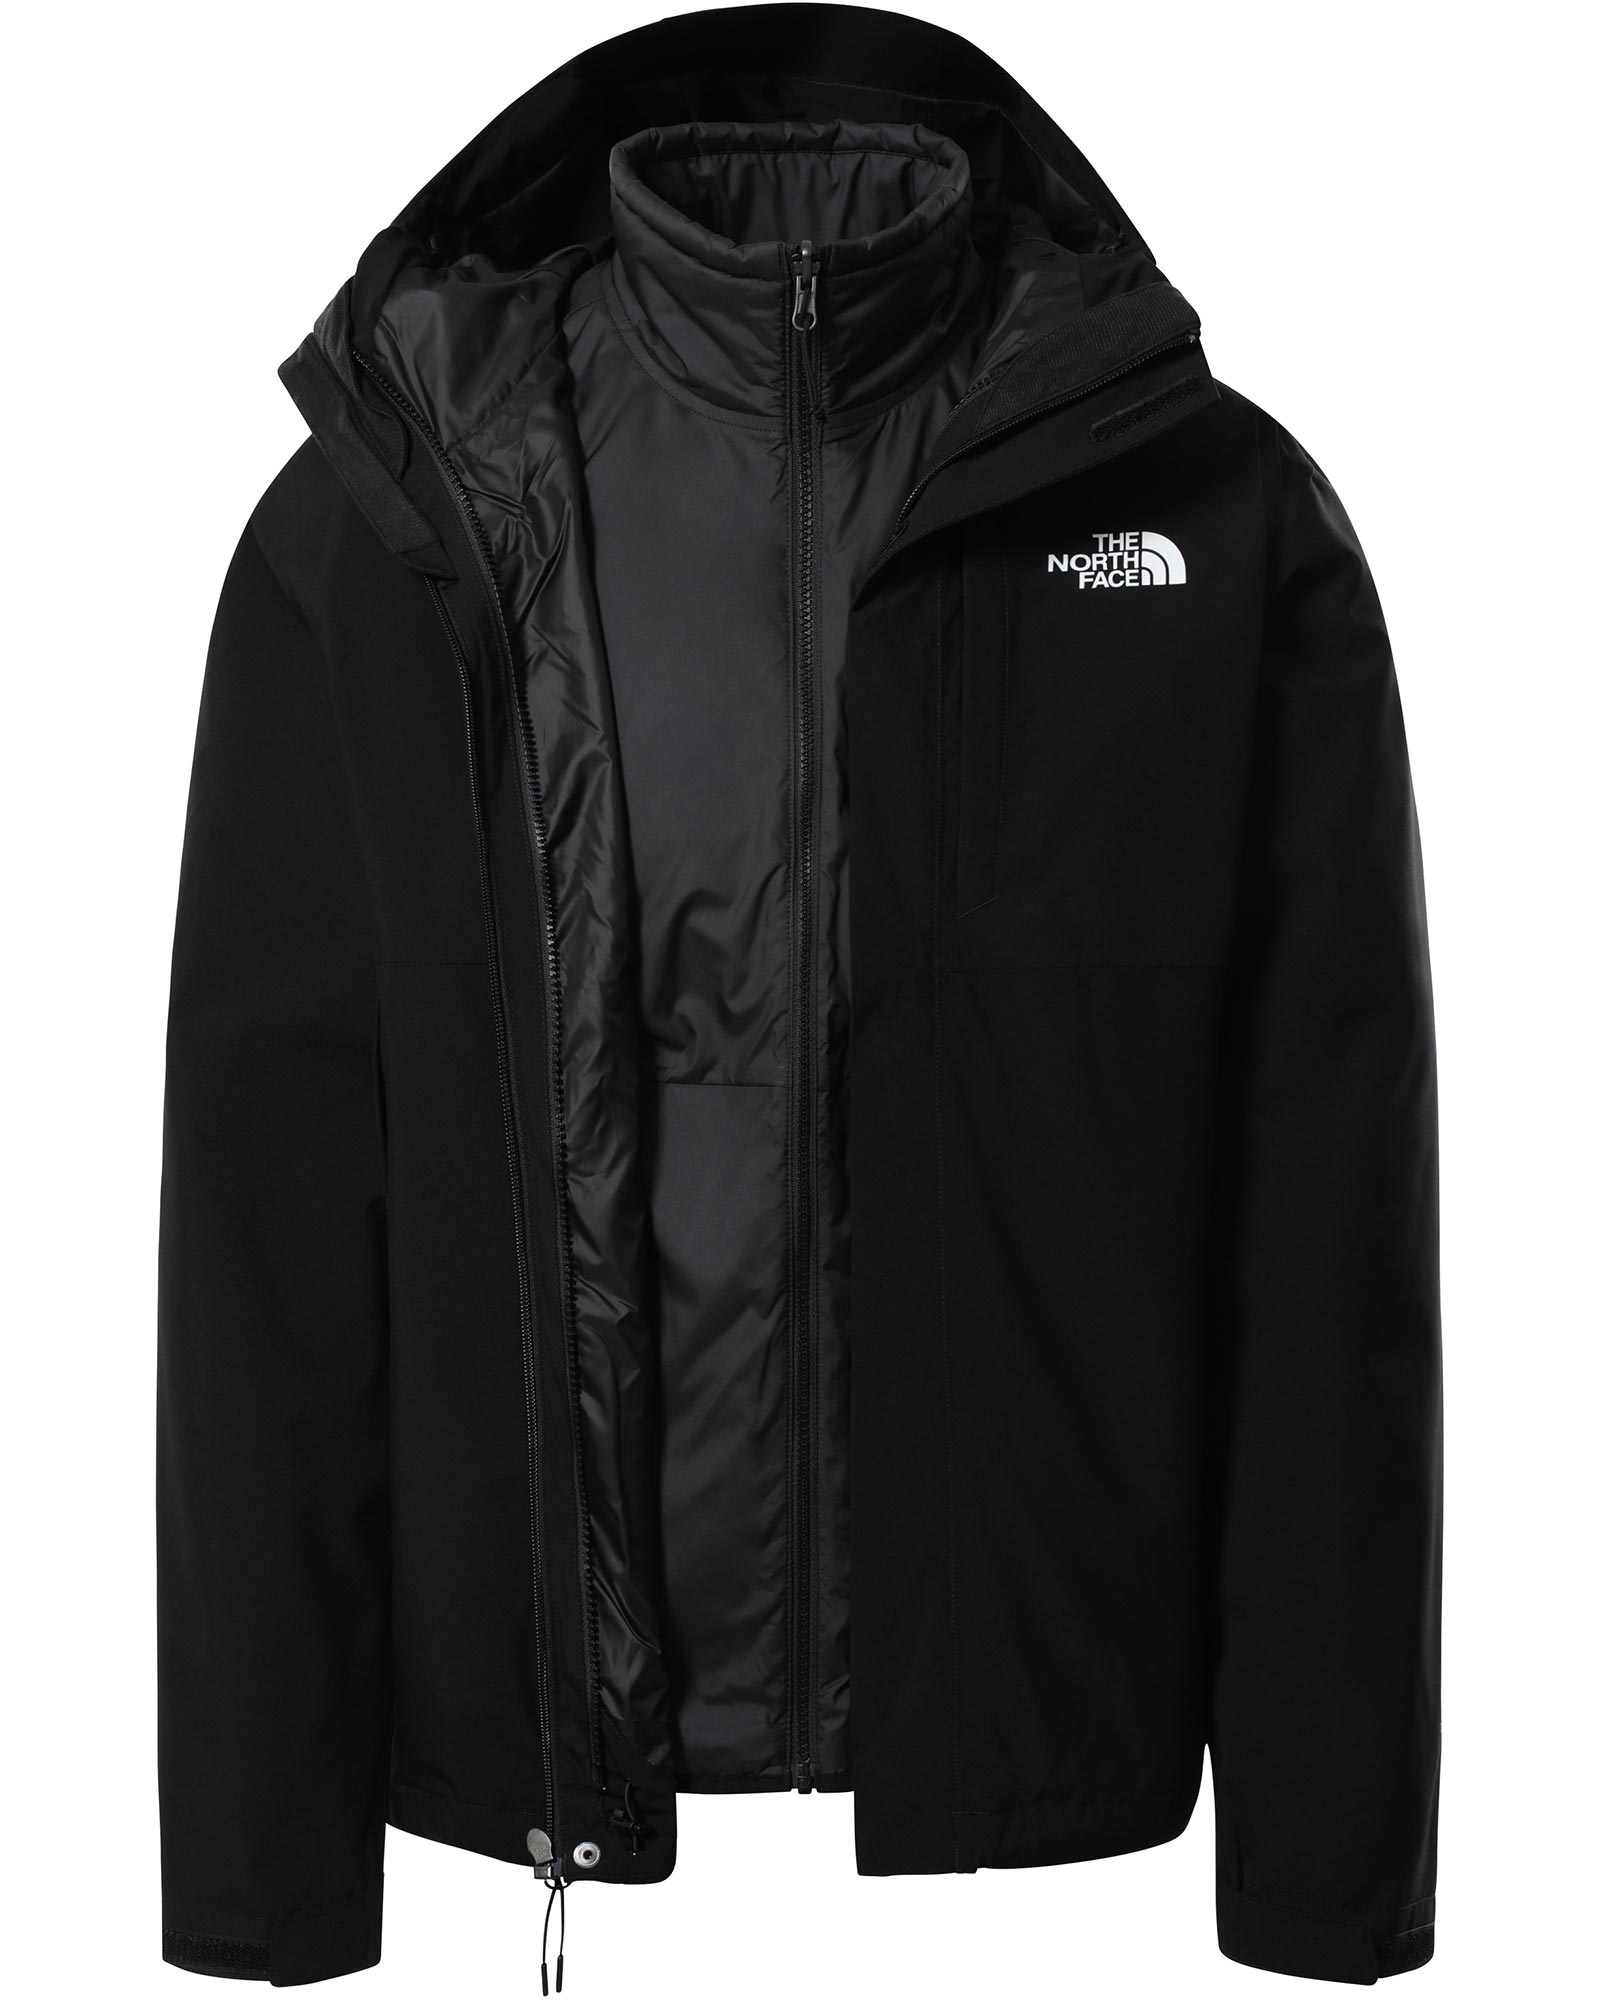 The North Face Carto Men’s Triclimate Jacket - TNF Black XL